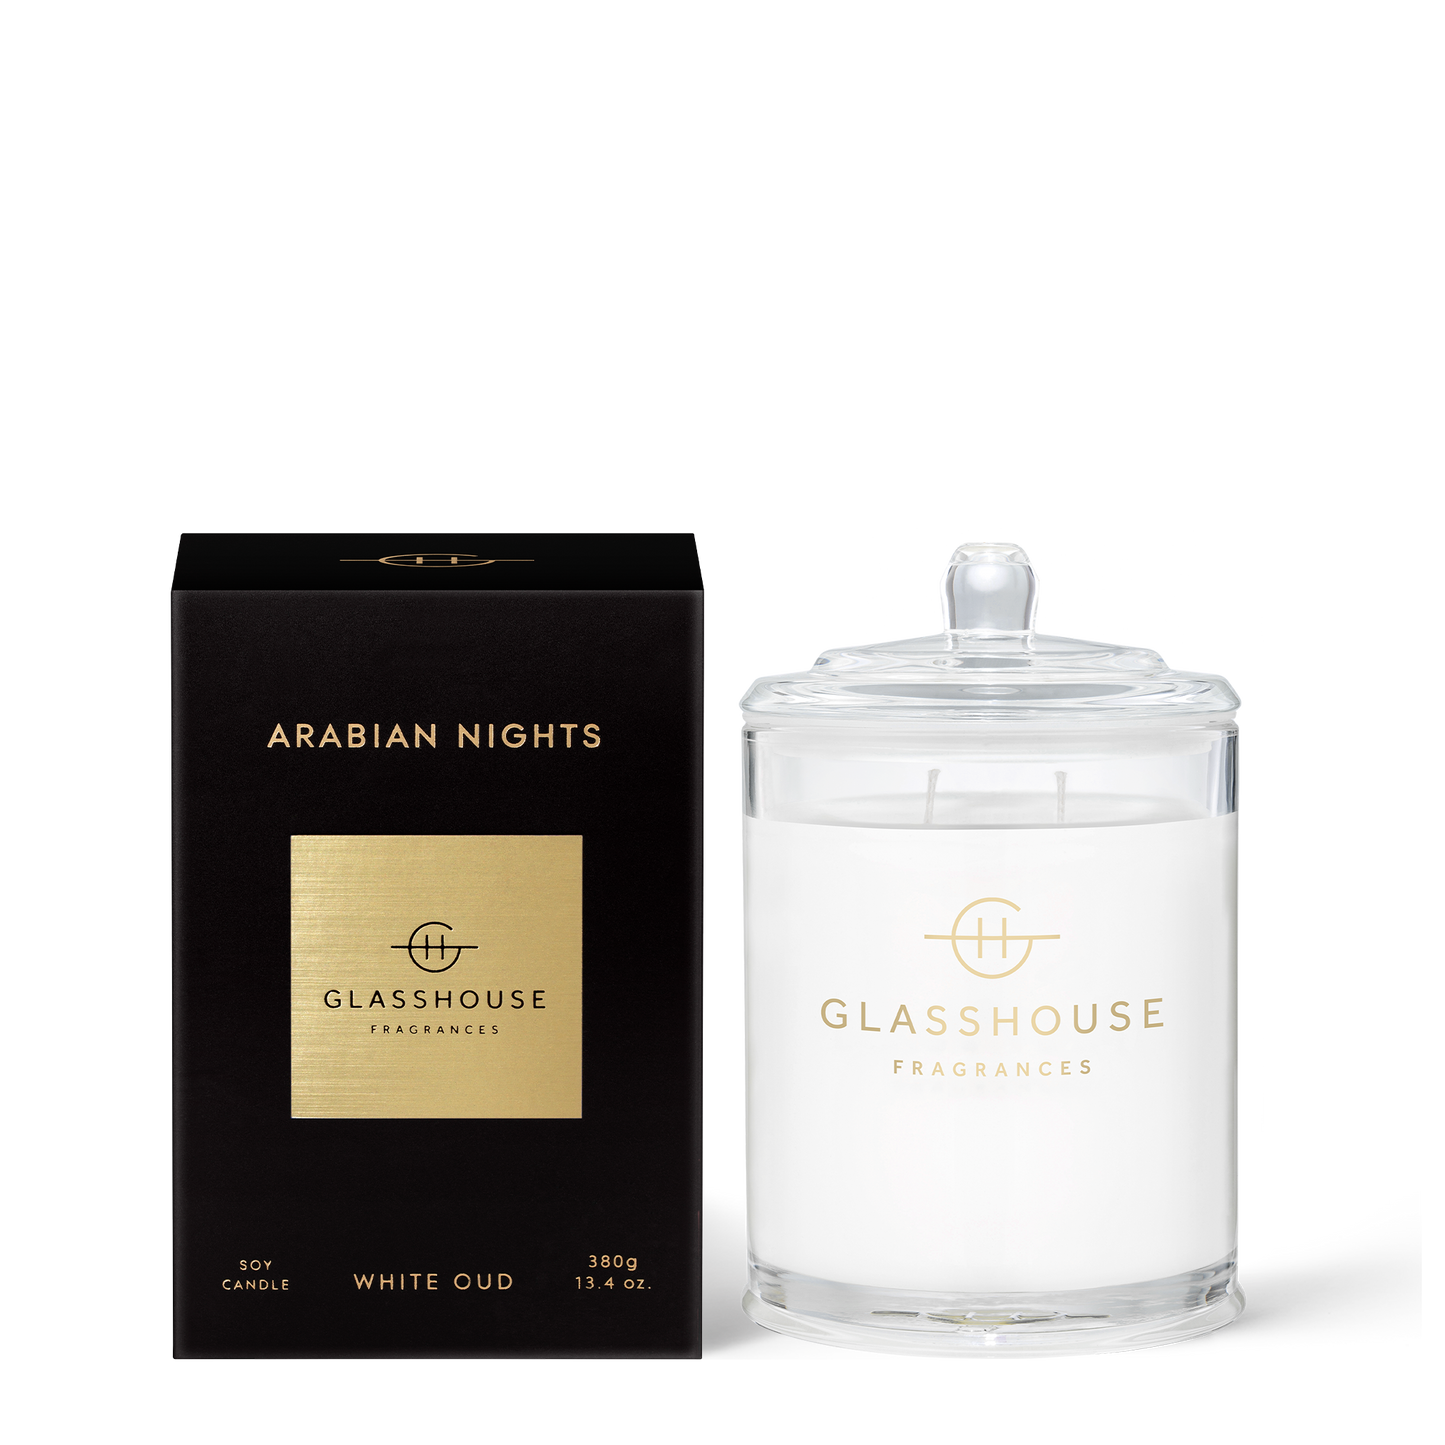 Arabian Nights 380g Candle White Oud  A transcendent everyday luxury, it creates instant ambience. Like a stroll through Dubai’s perfume souk at dusk, it’s rich with saffron and white oud.